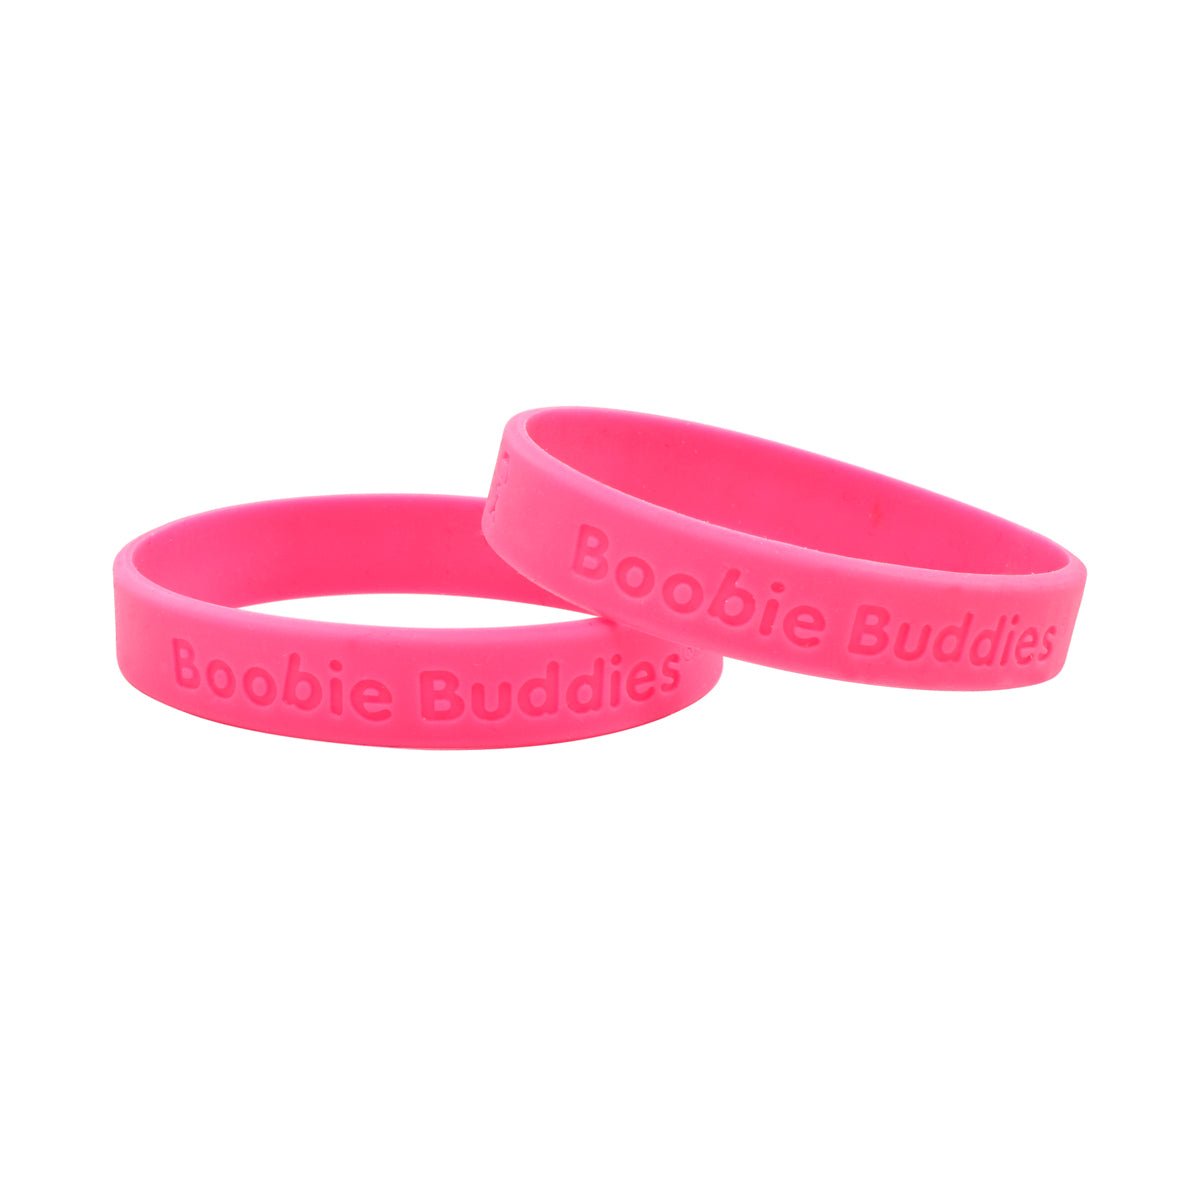 Boobie Buddies Pink Breast Cancer Awareness Silicone Bracelet Wristbands - Fundraising For A Cause